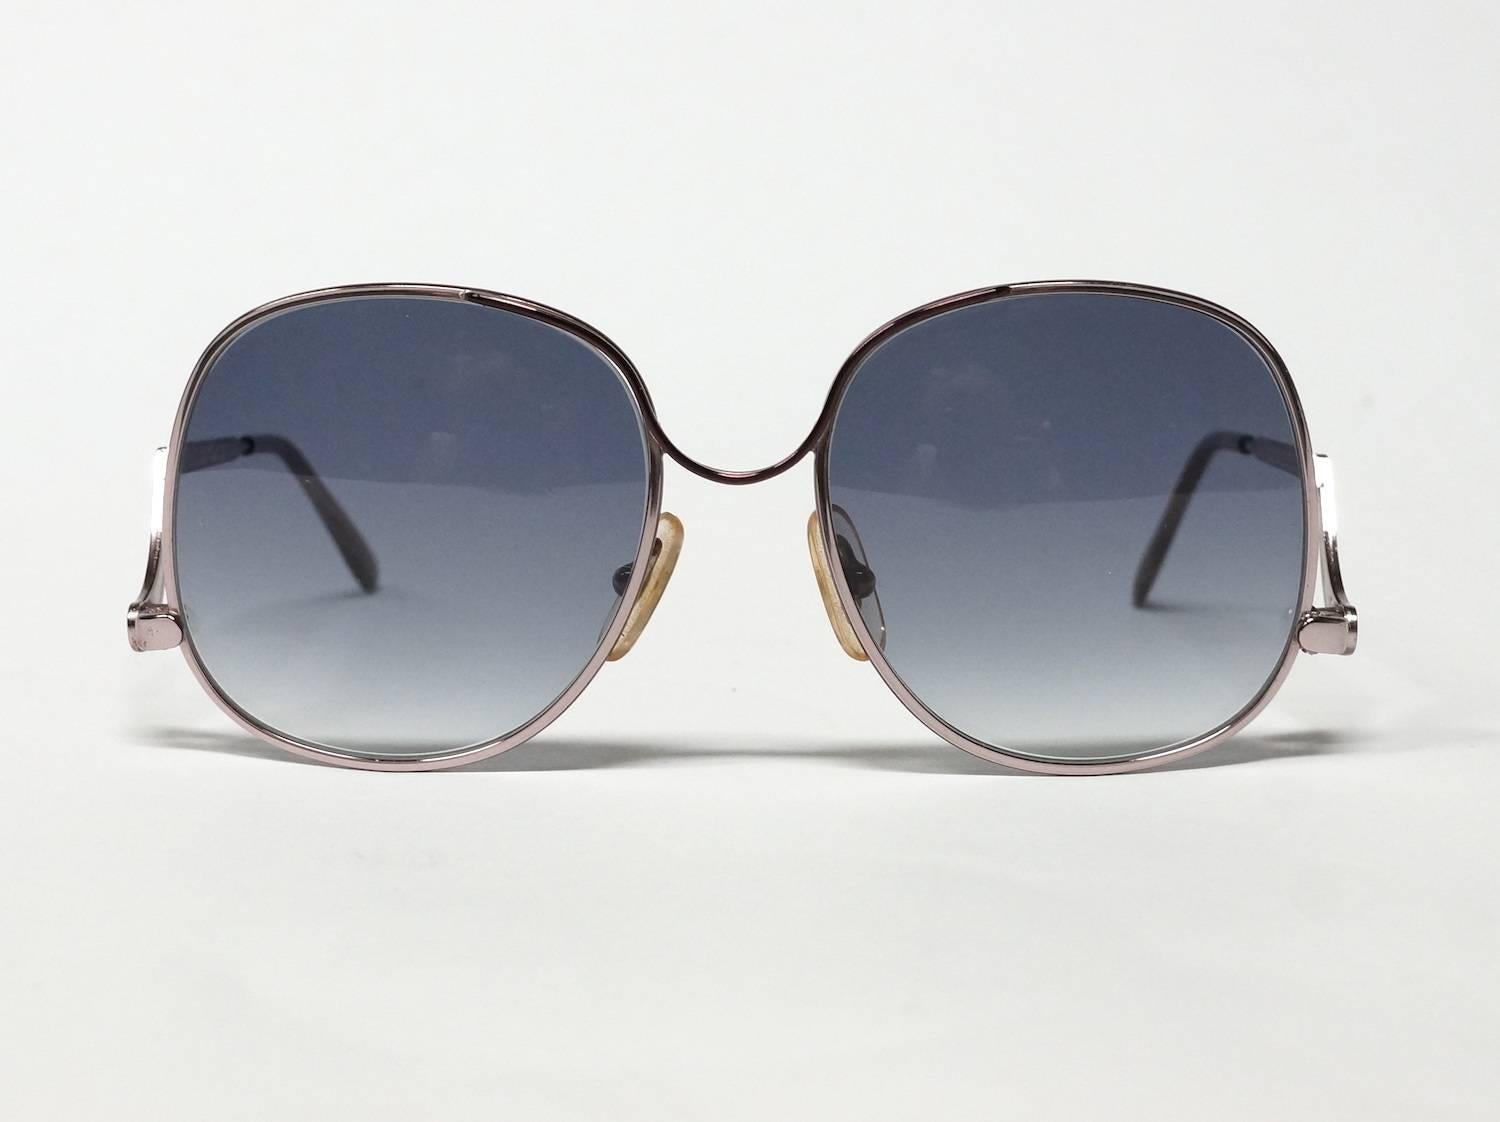 1990s oversized vintage sunglasses by Robert Claude Paris. High quality oversized rose gold metal optical frame with darker accents and stunning low placed swinging temples. 

Model: 4005
size: 54▢20 -140 

approximate dimensions: 
temple